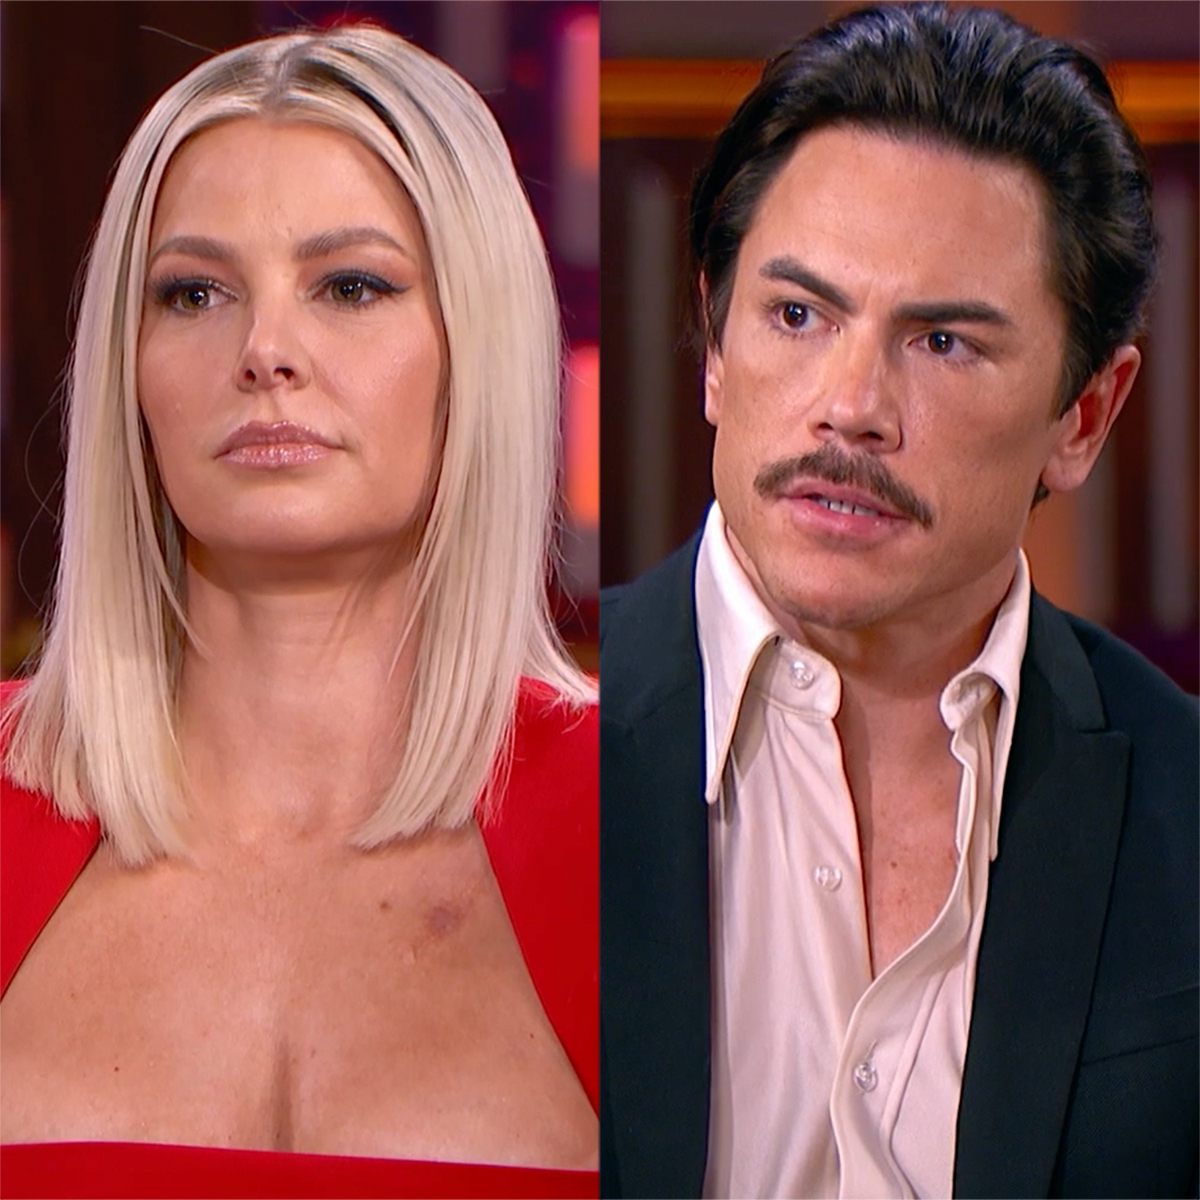 See Vanderpump Rules' Ariana Madix and Tom Sandoval Face Off in Uncomfortable Preview